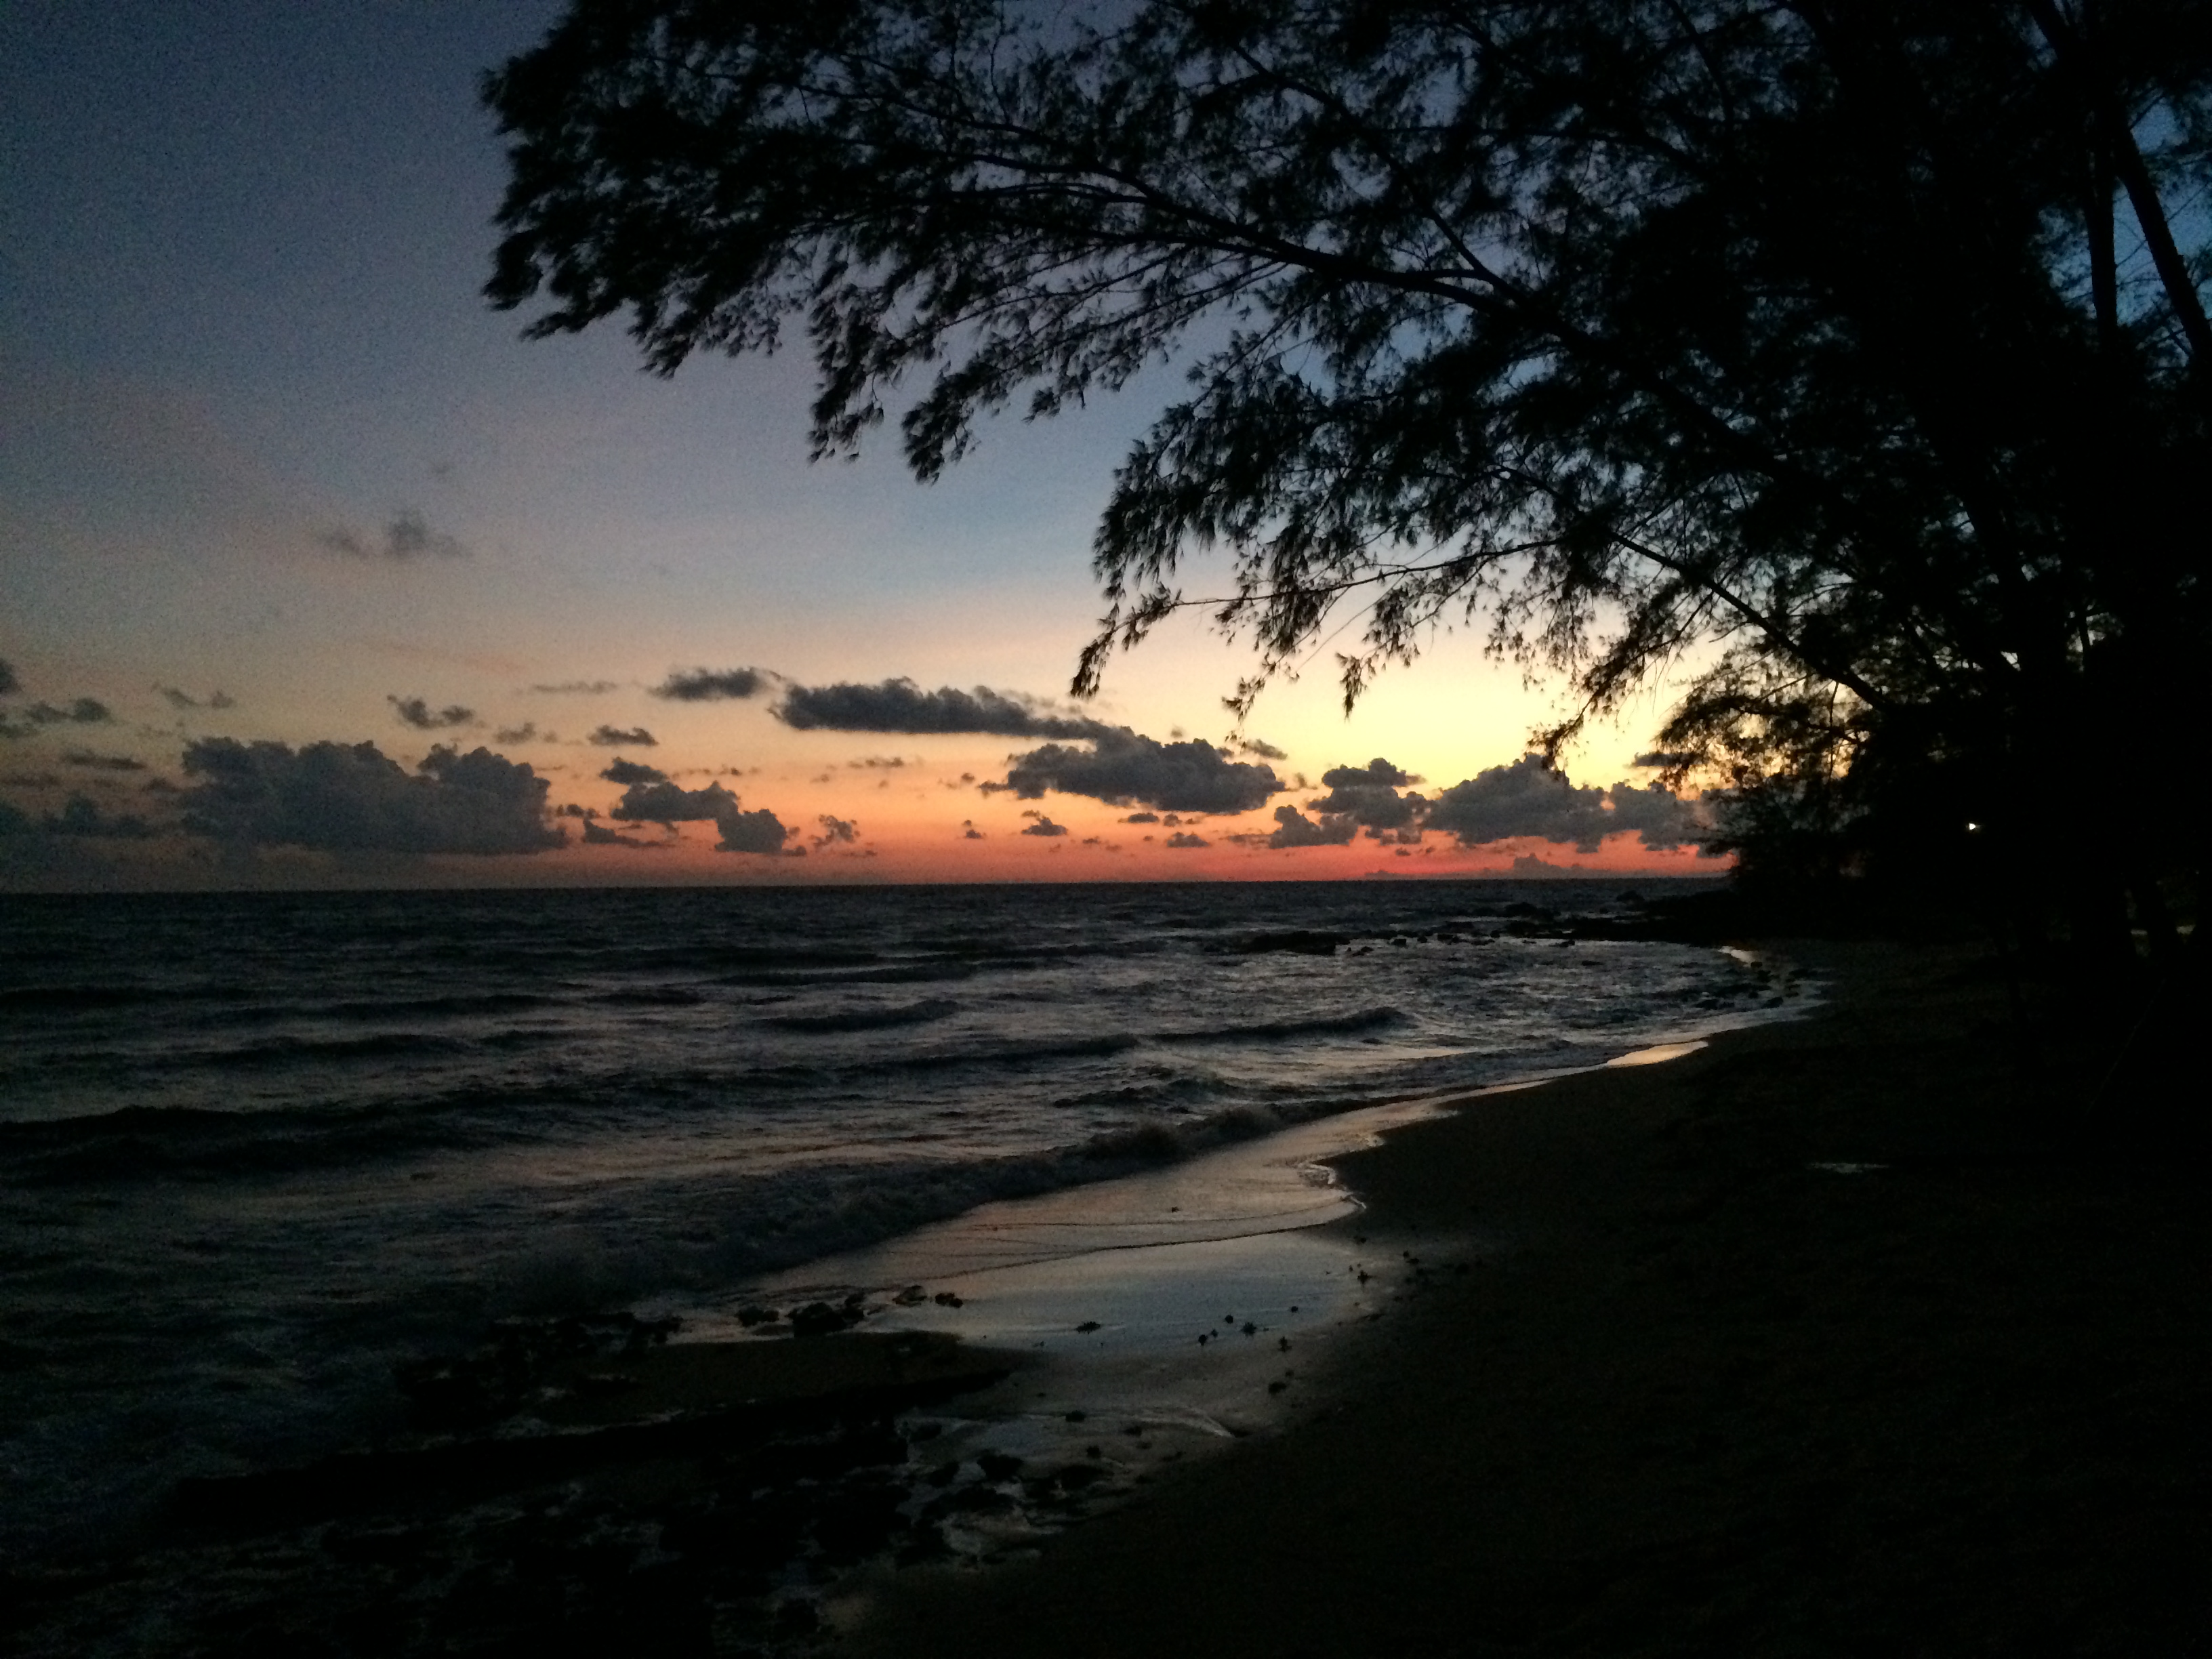 The beach at sunset in Phu Quoc